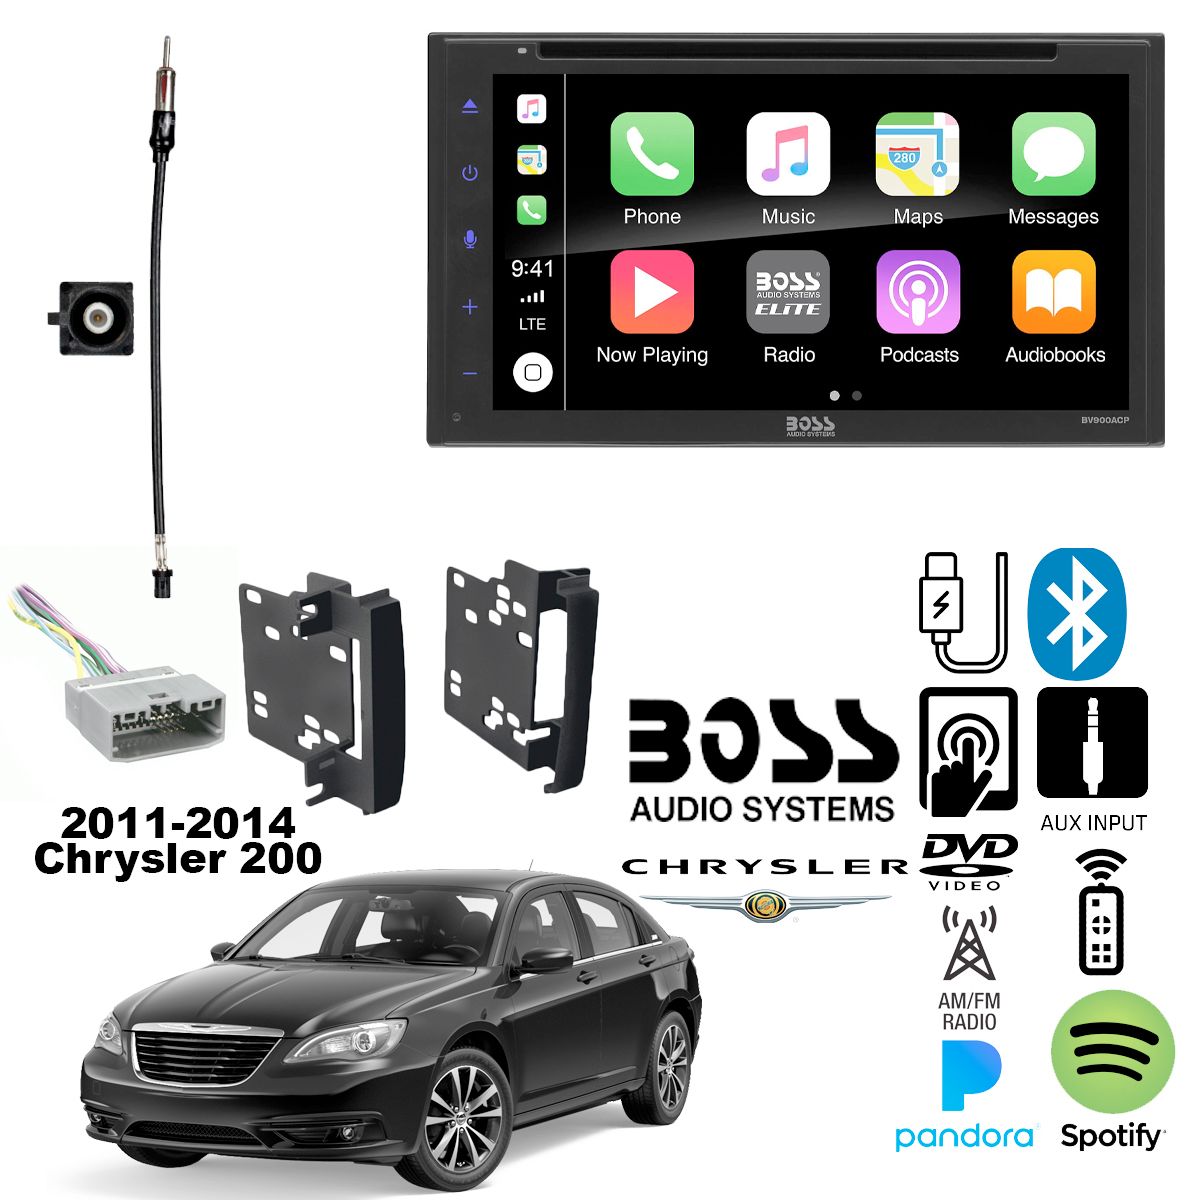 6.75" Multimeda Cd/Dvd Receiver CarPlay , Android Auto For 2011-14 Chrysler 200